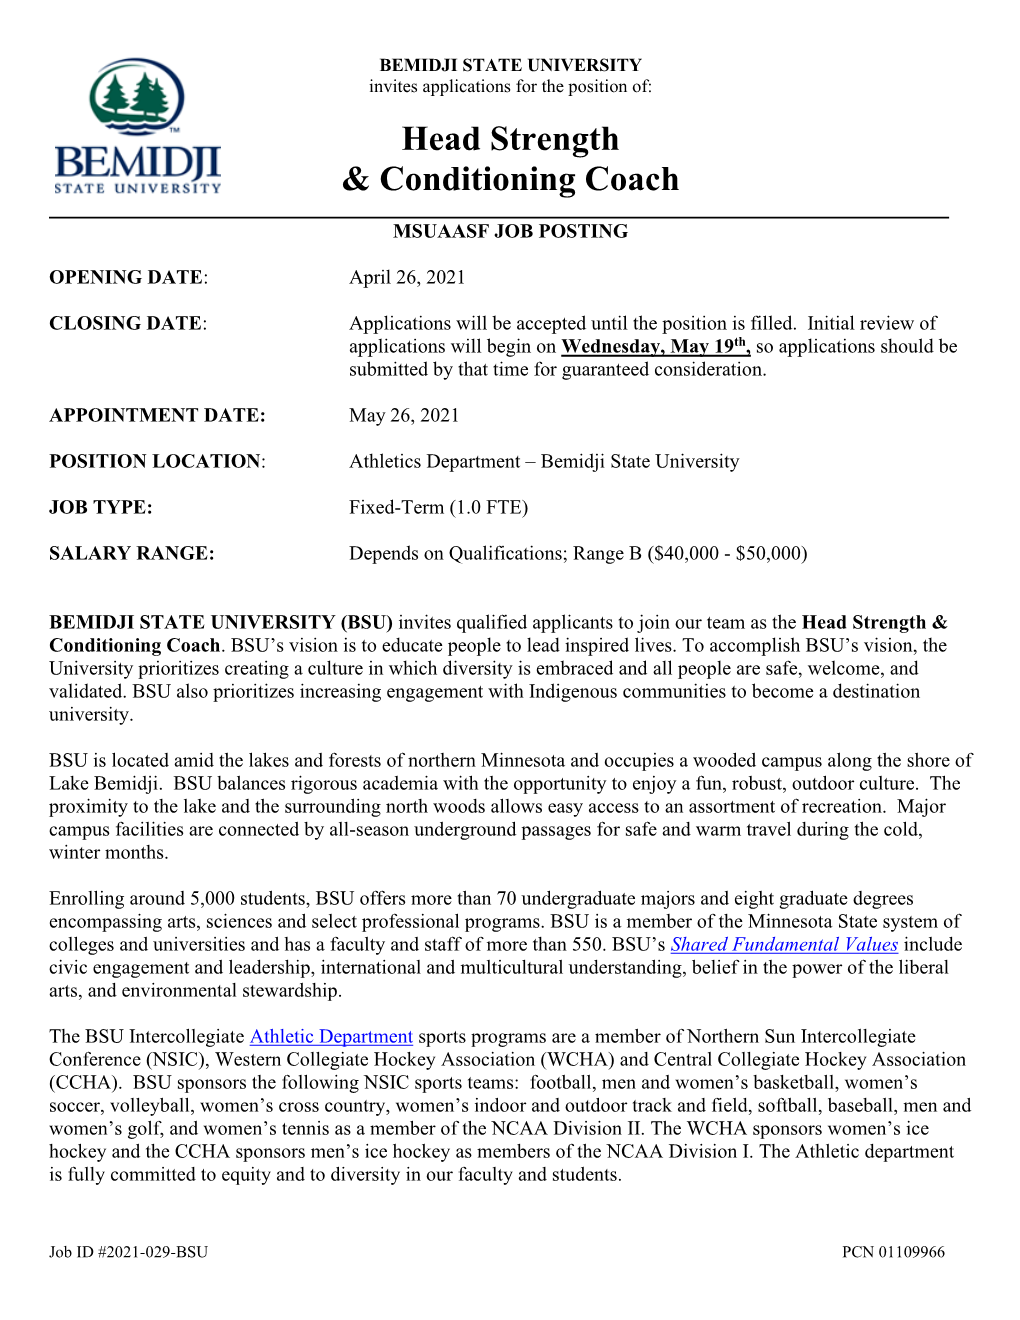 Head Strength & Conditioning Coach